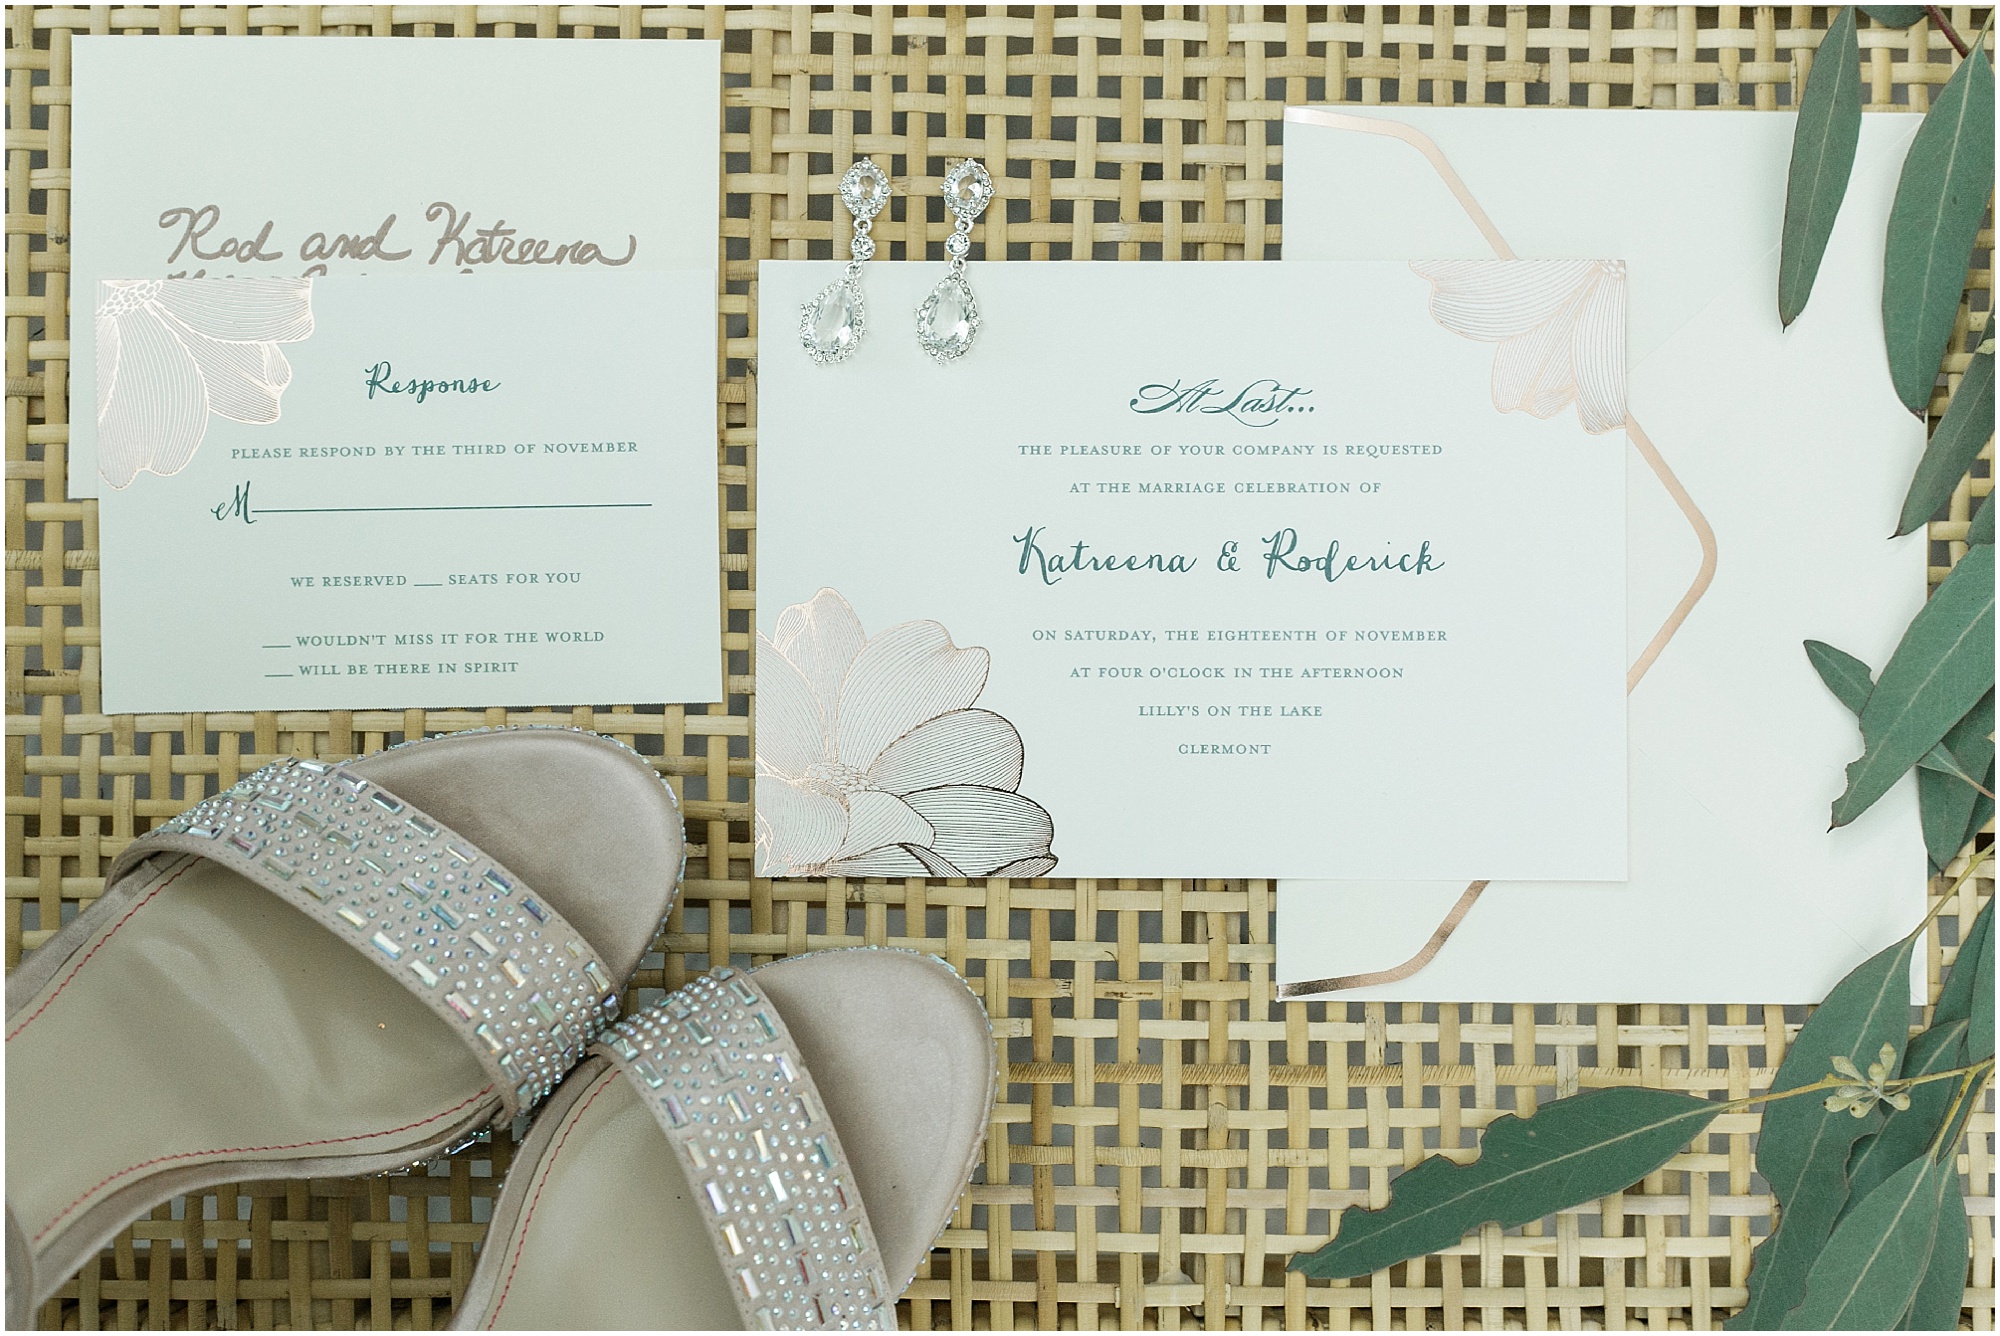 Sparkly shoes and earrings along with wedding invitations to an intimate lakeside wedding.